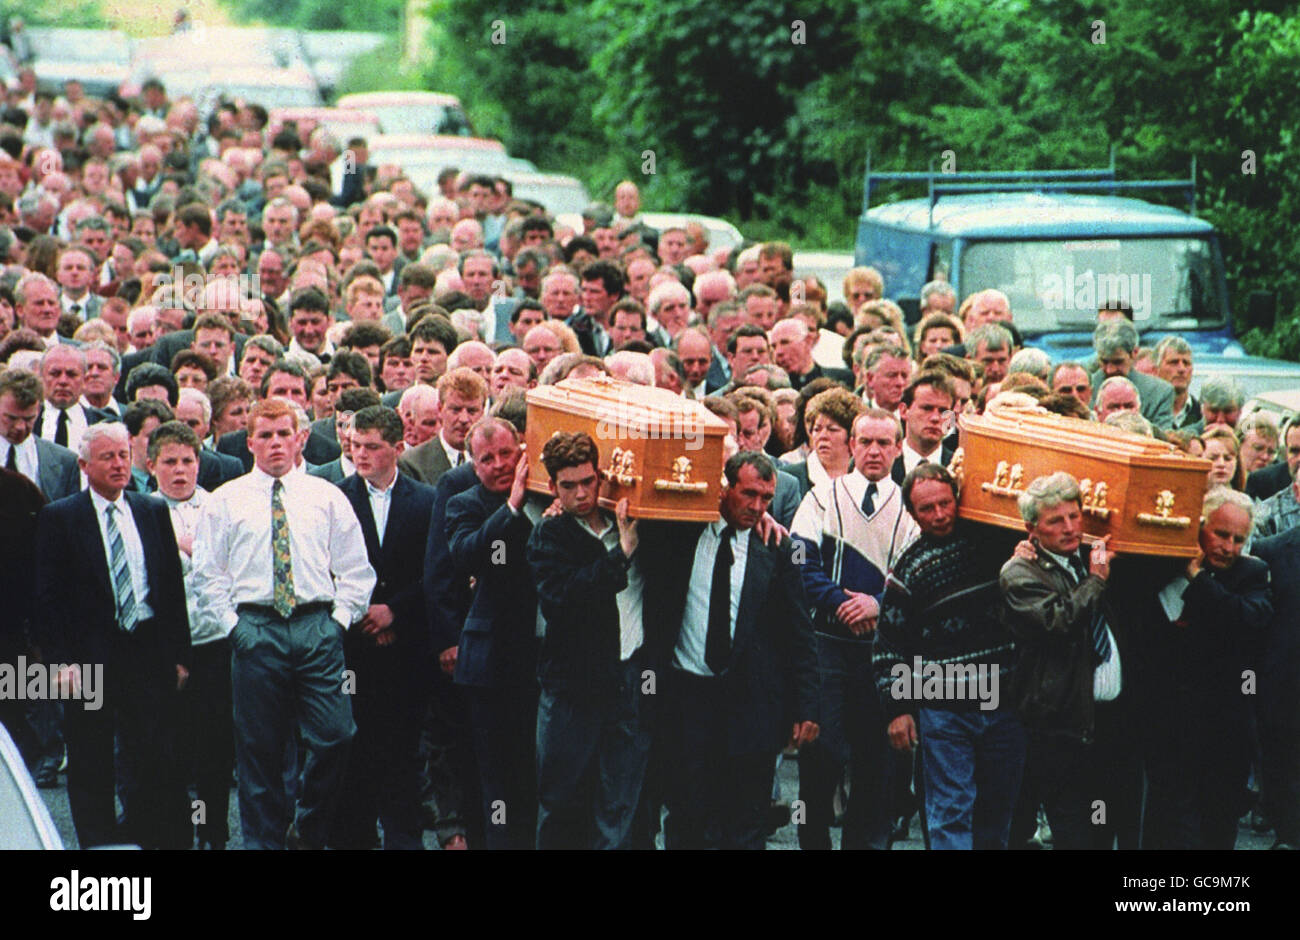 THE TOWNSPEOPLE OF LOUGHISLAND FOLLOW THE COFFINS OF 87 YEAR OLD BARNEY GREEN AND HIS NEPHEW, DAN MCREANOR, AS THEY ARE CARRIED TO THE HOLY FAMILY CHURCH FOR THEIR FUNERAL SERVICE. Stock Photo